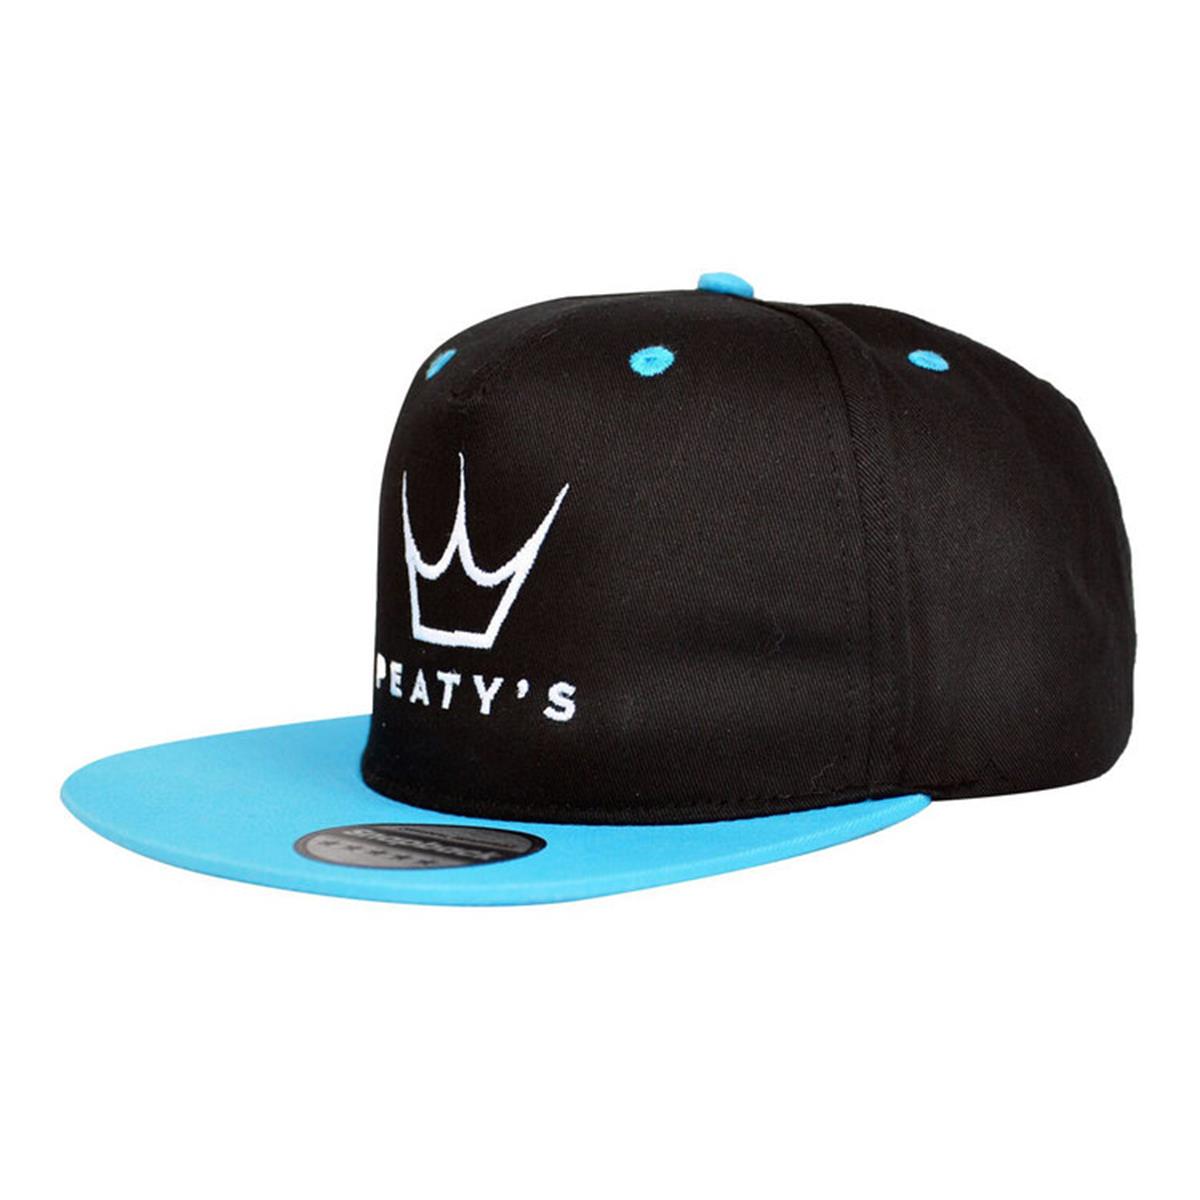 Peaty's Cap Embroidered Black/Blue